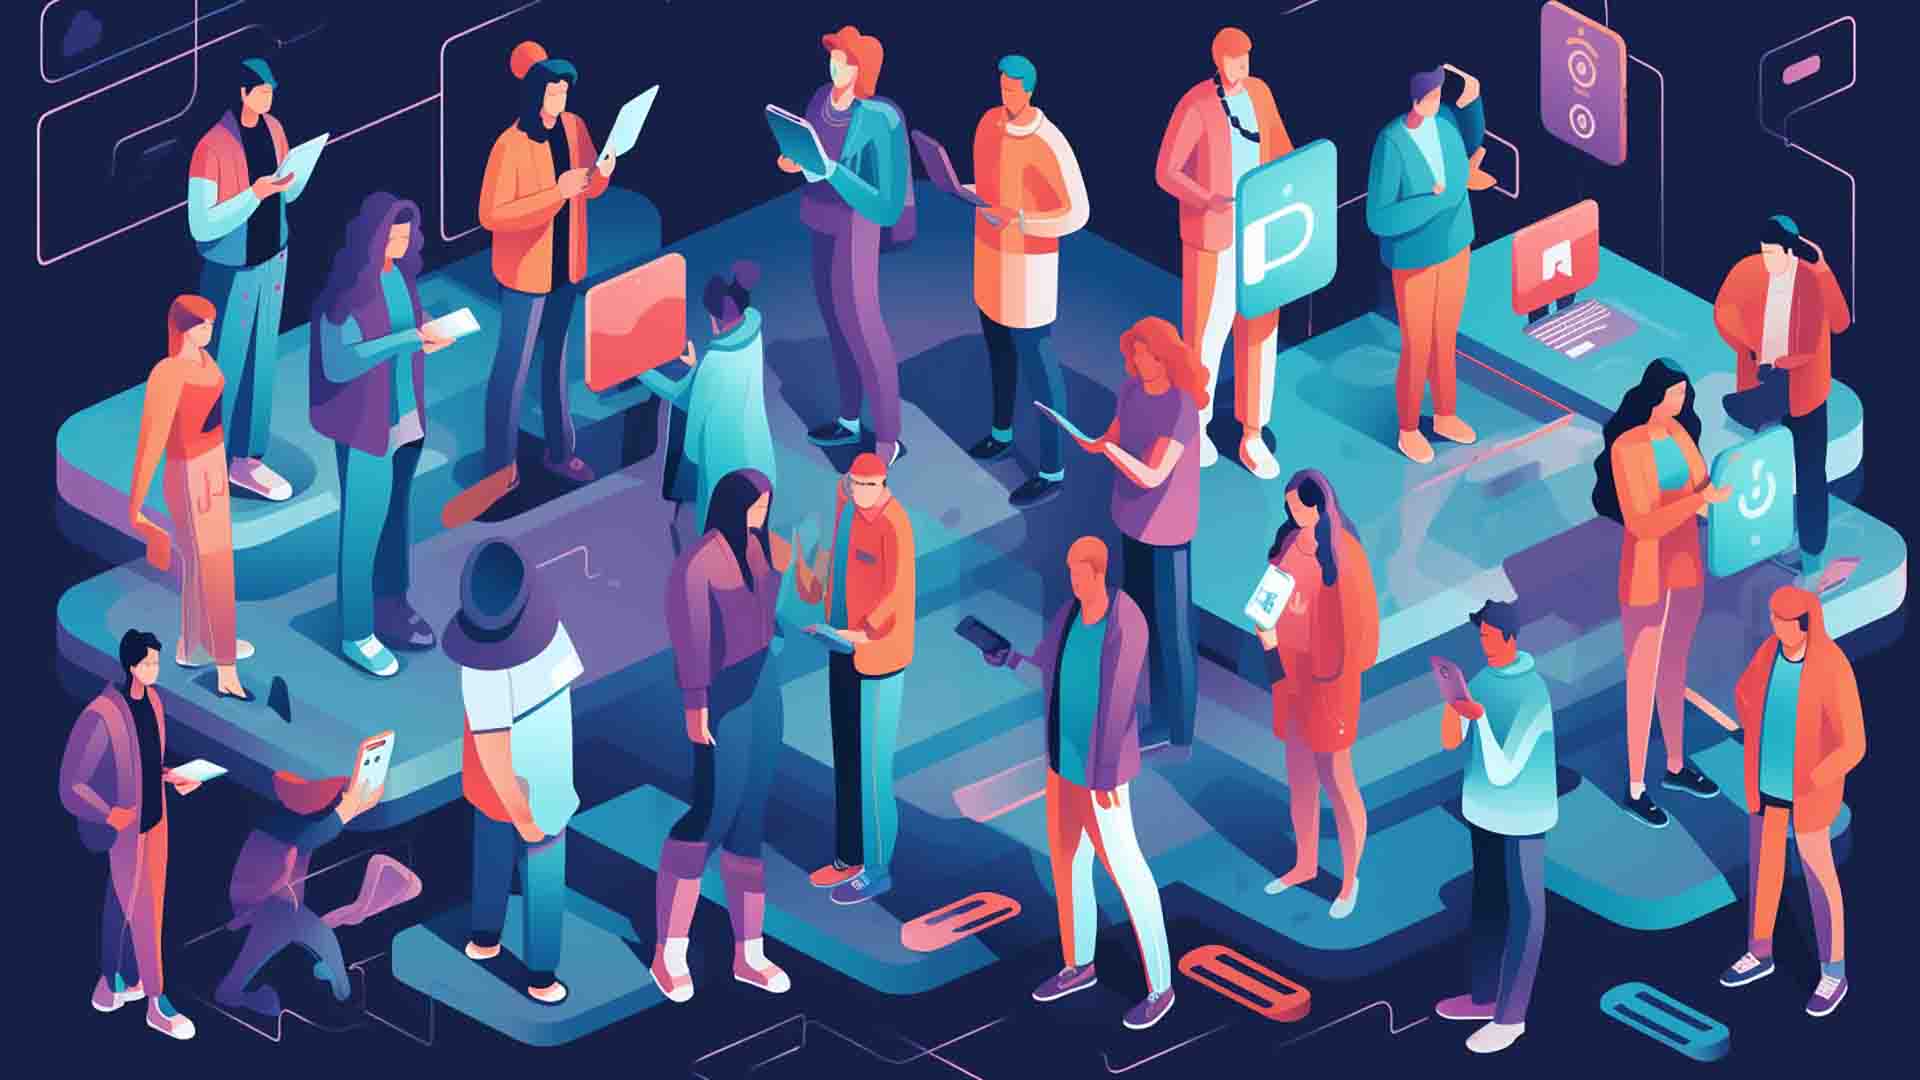 A illustration depicting a diverse group of people (representing customers, artists, influencers, and marketers) interacting and engaging with NFTs through various devices.